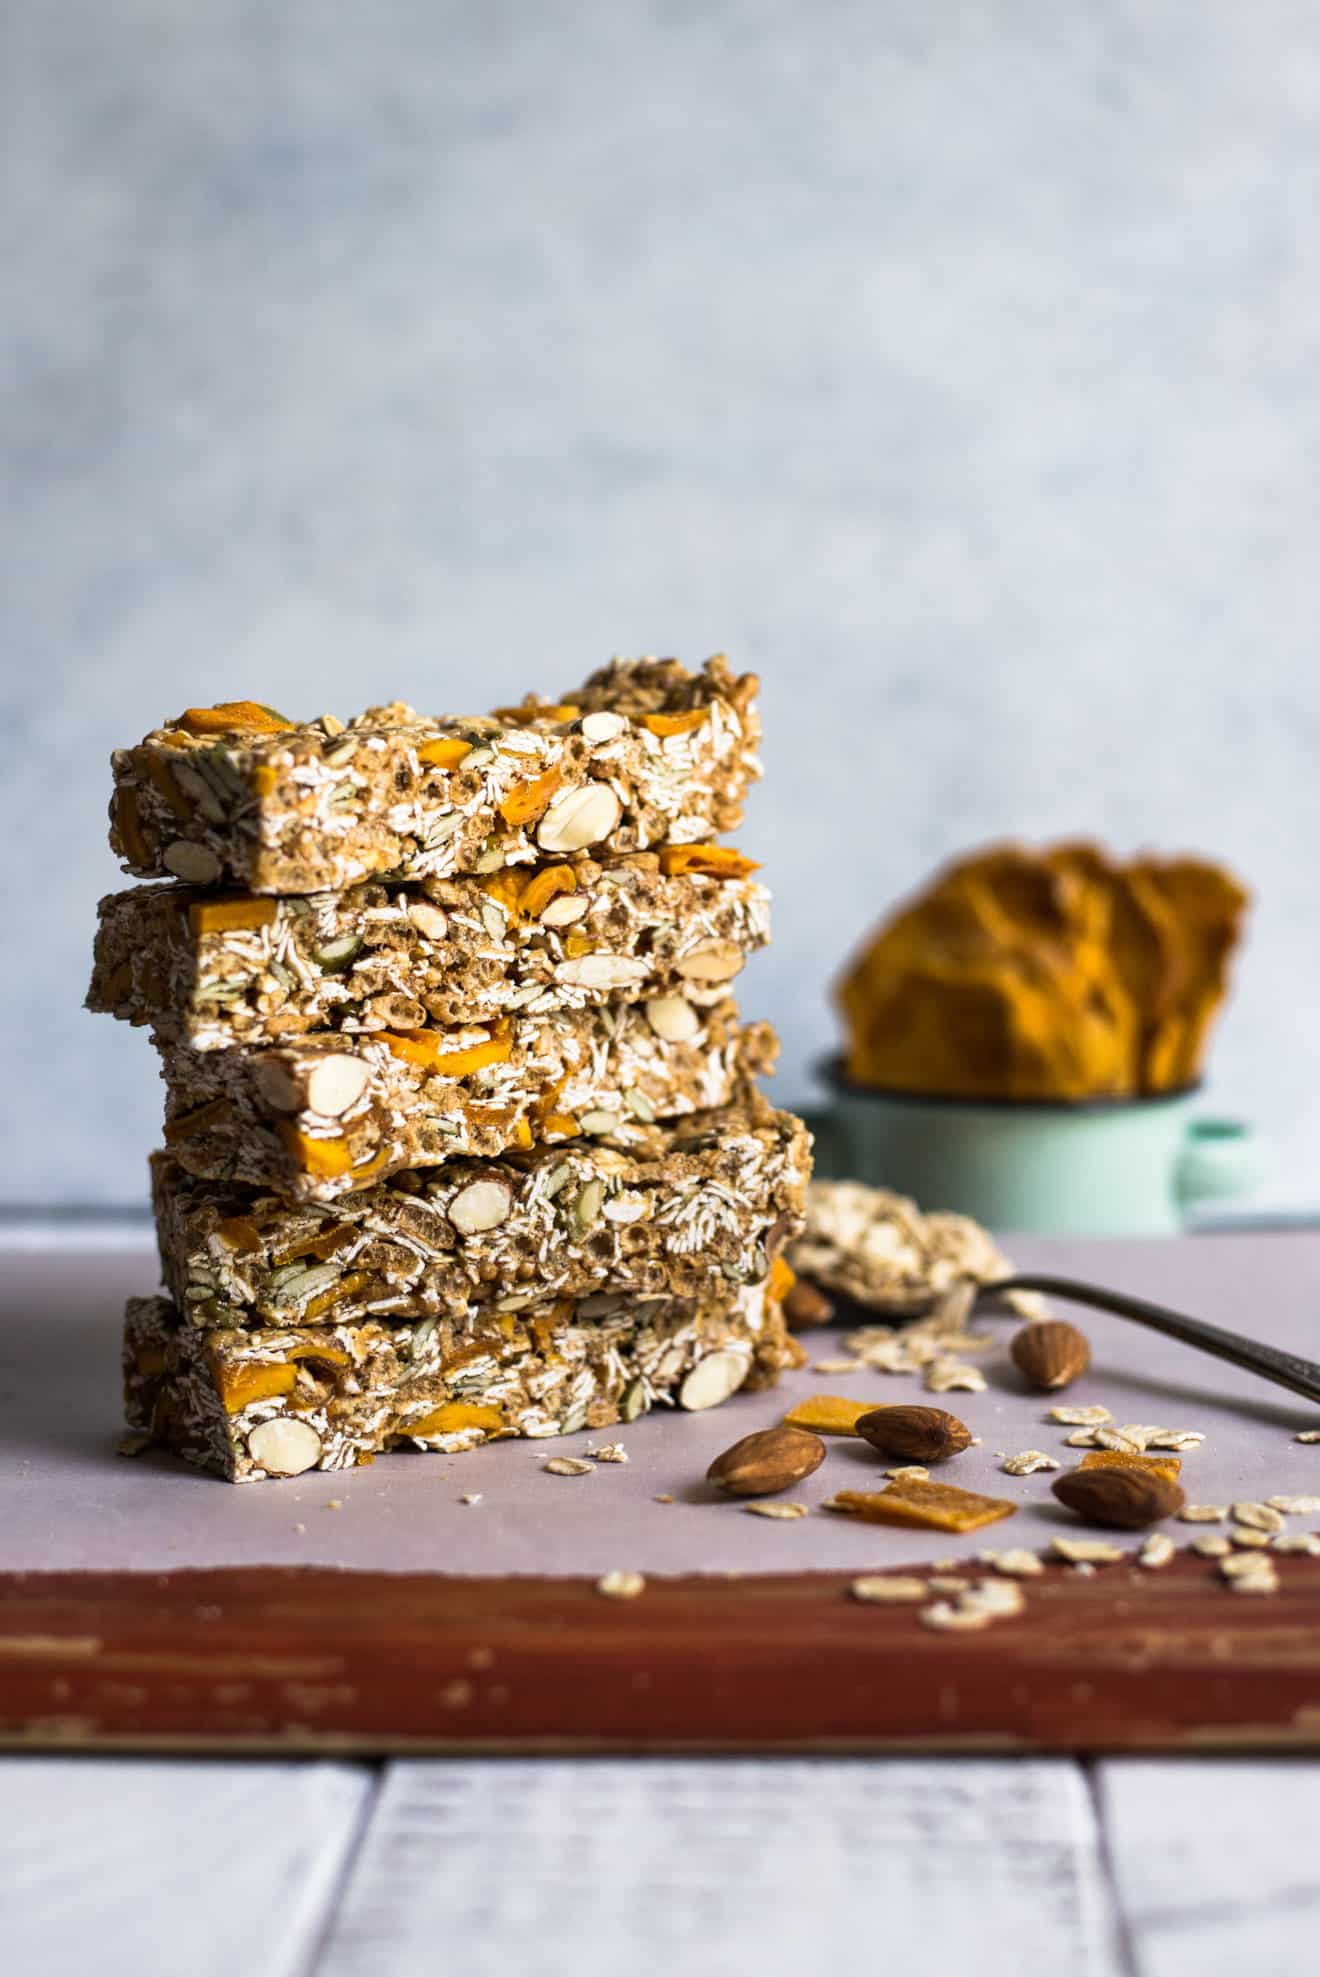 Chili Mango Snack Bars - making granola bars at home is much easier than you think! These healthy snack bars are gluten free!